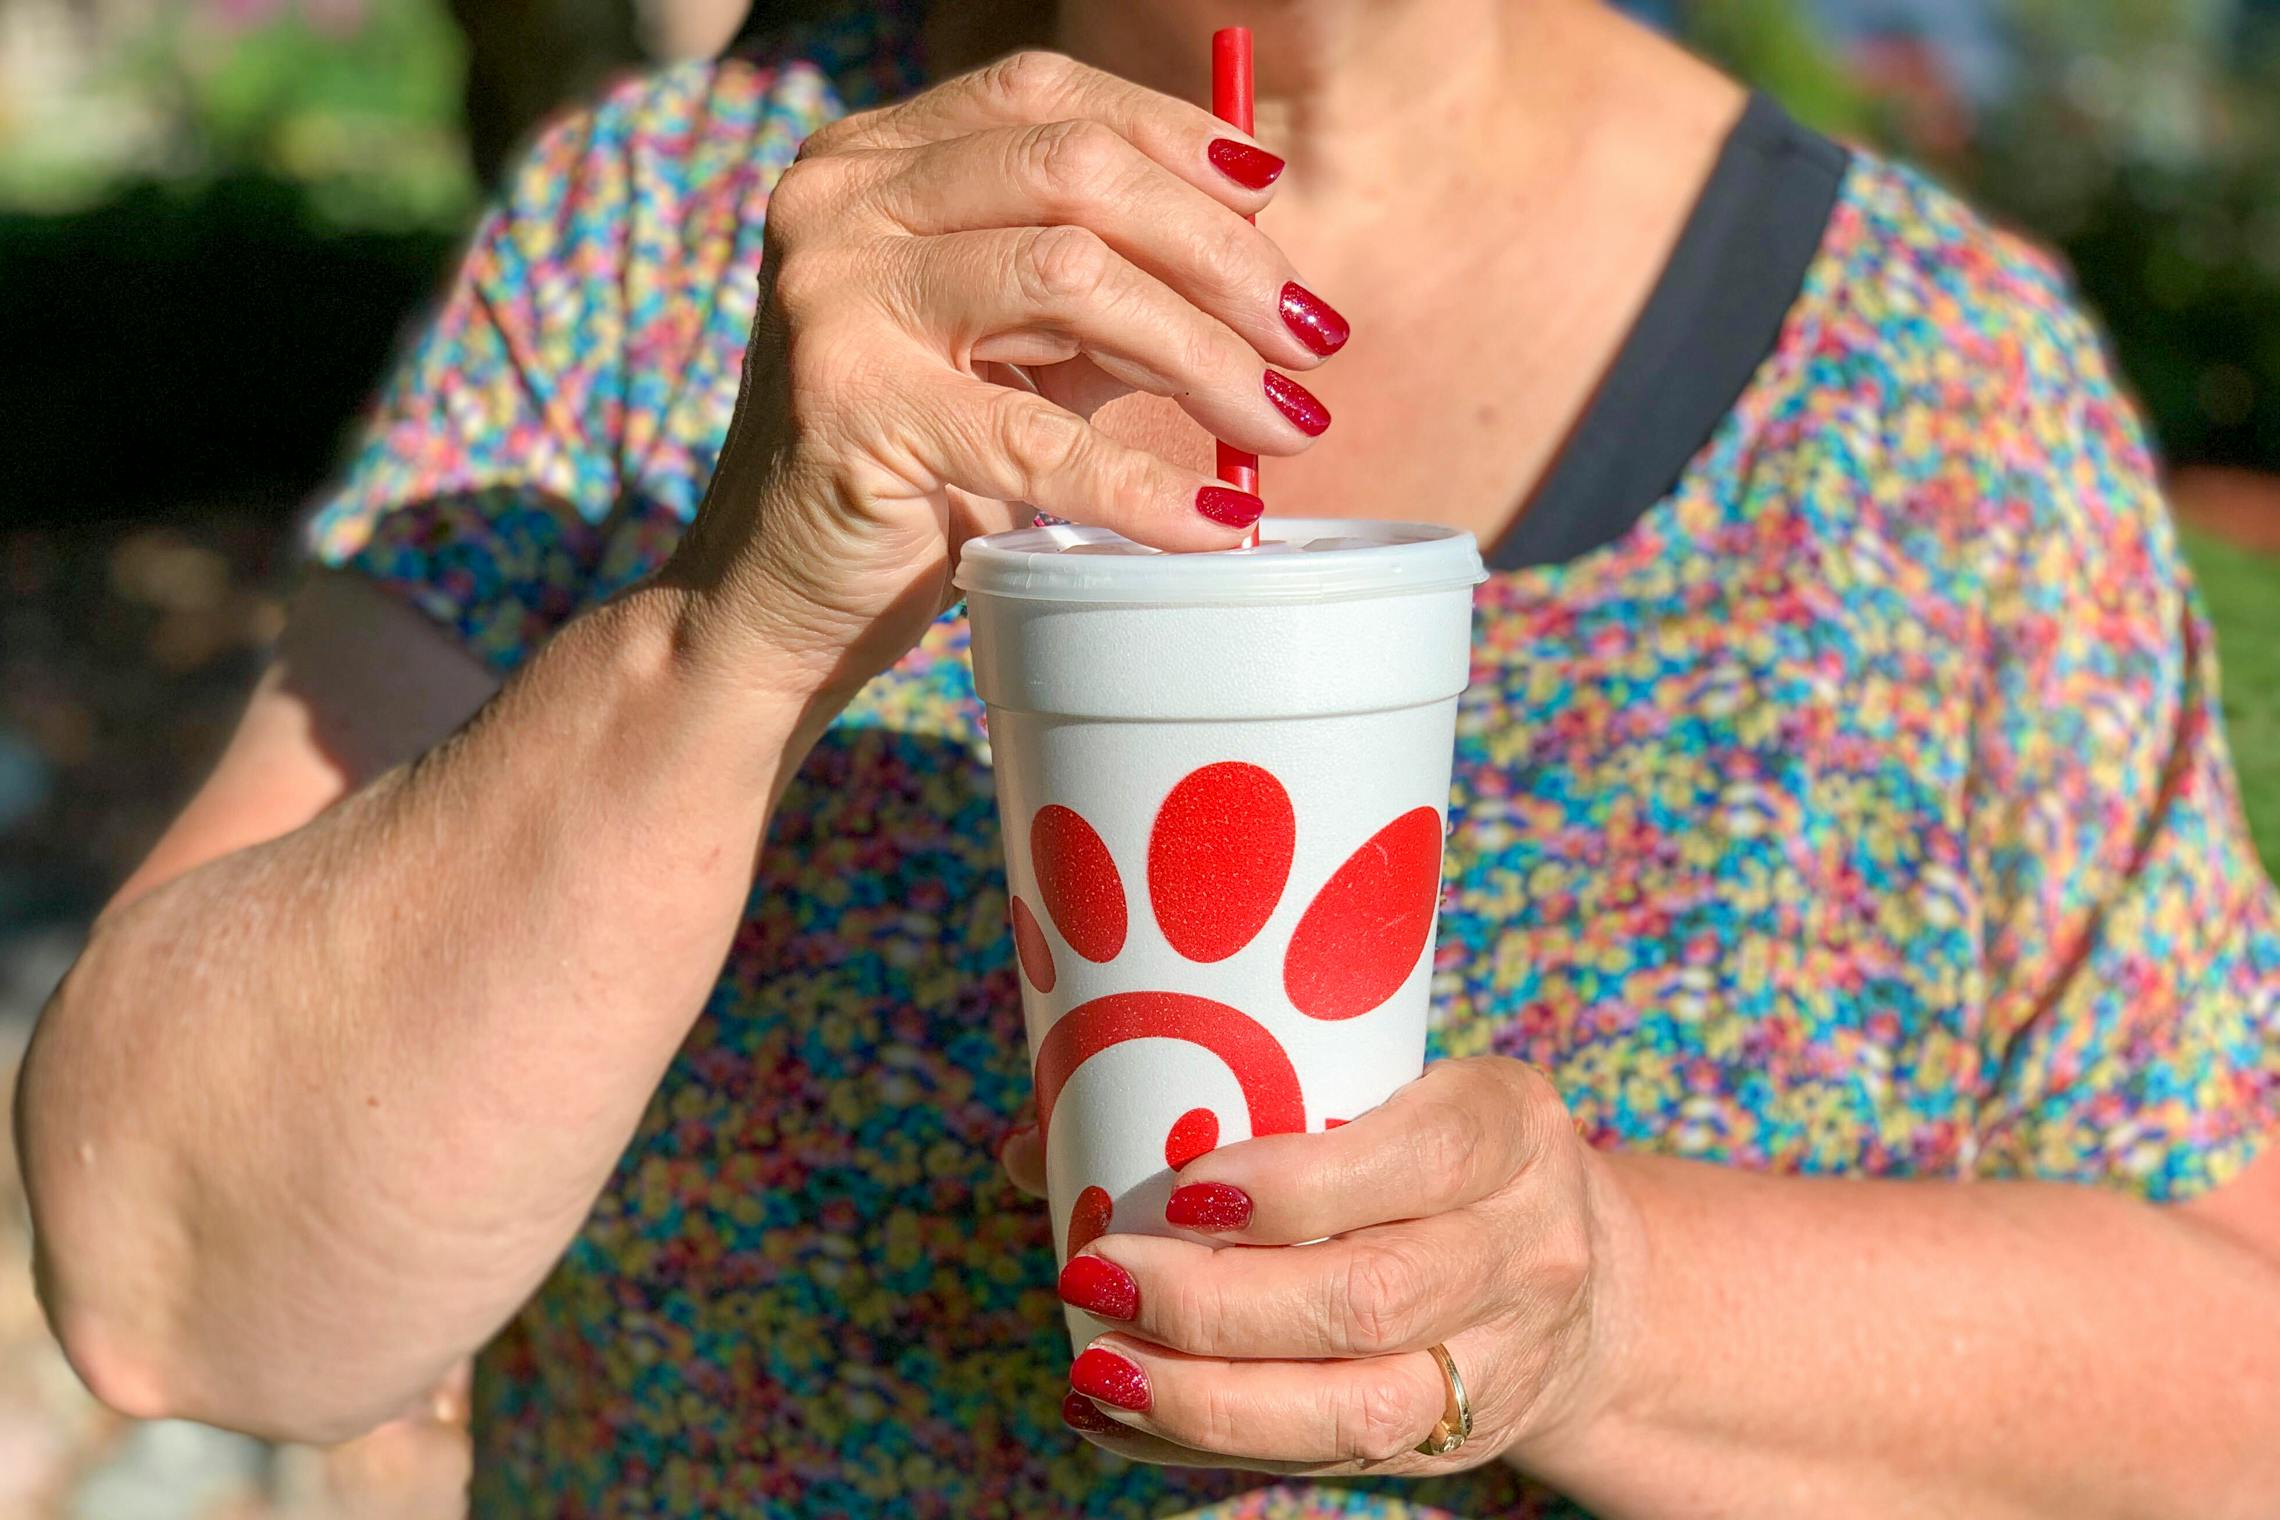 A senior-aged woman drinking soda from a Chick-fil-A drink cup.